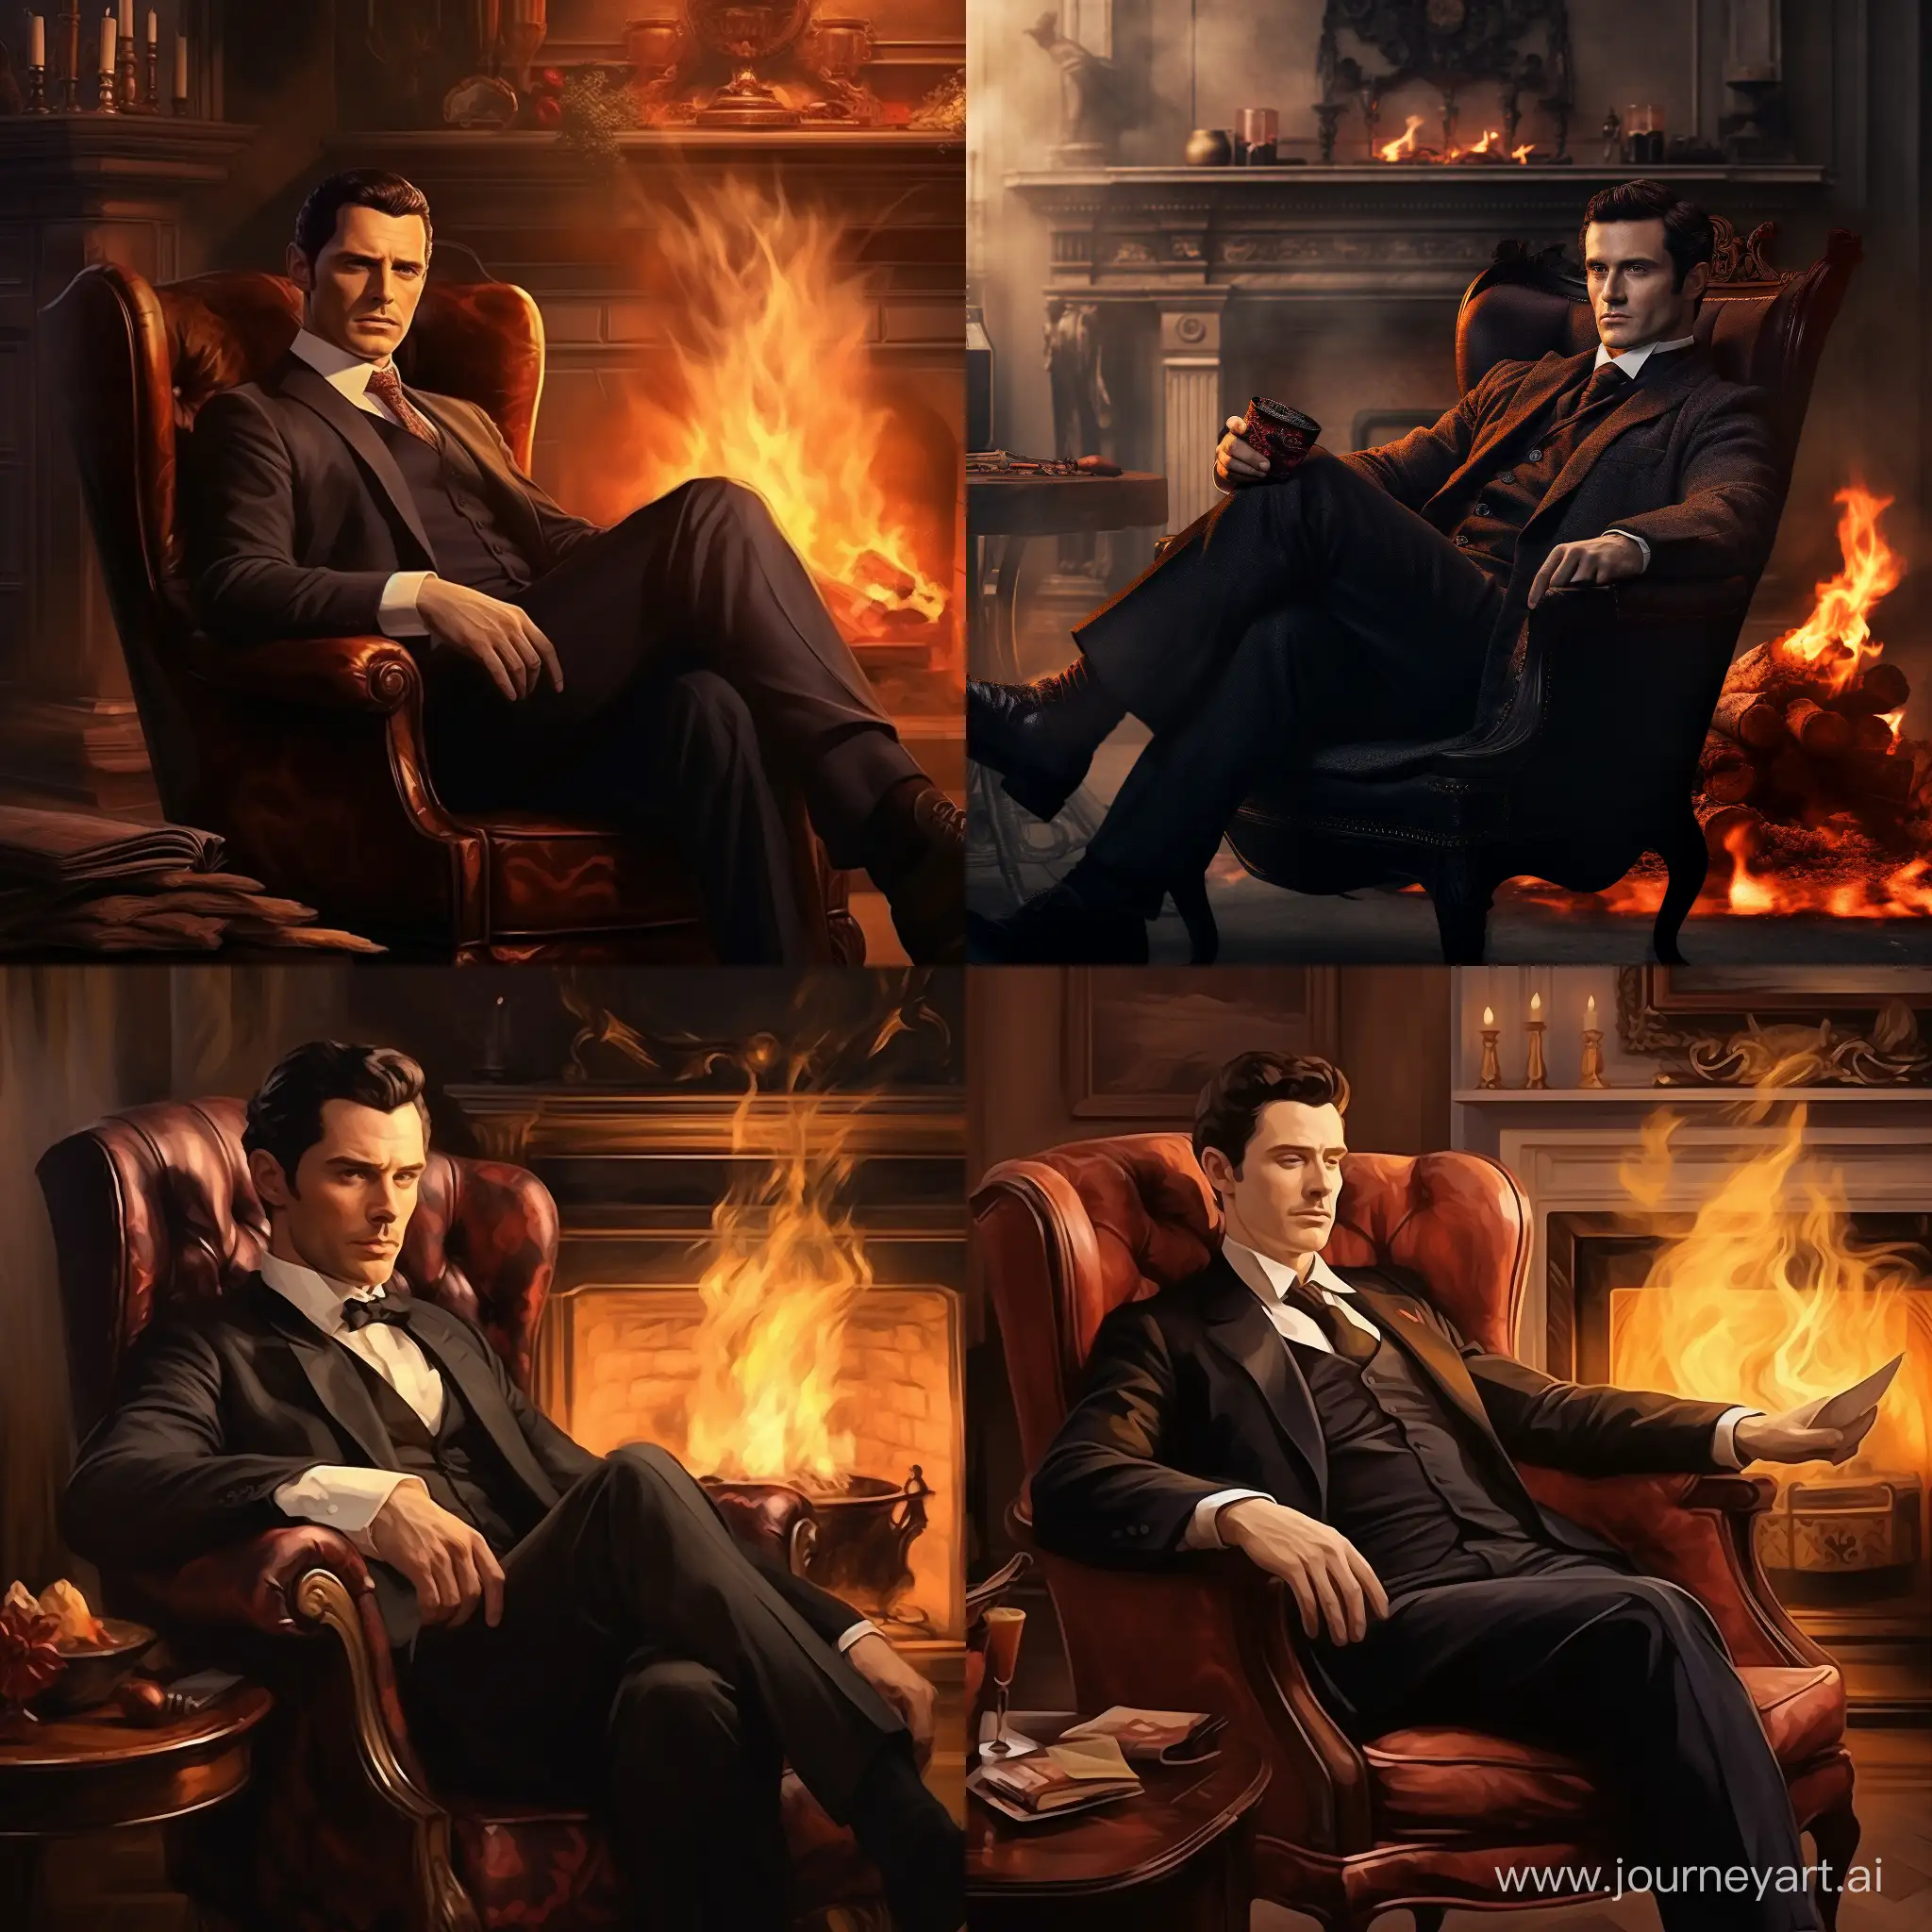 Sherlock-Holmes-Contemplating-by-the-Fireplace-in-Mysterious-Atmosphere